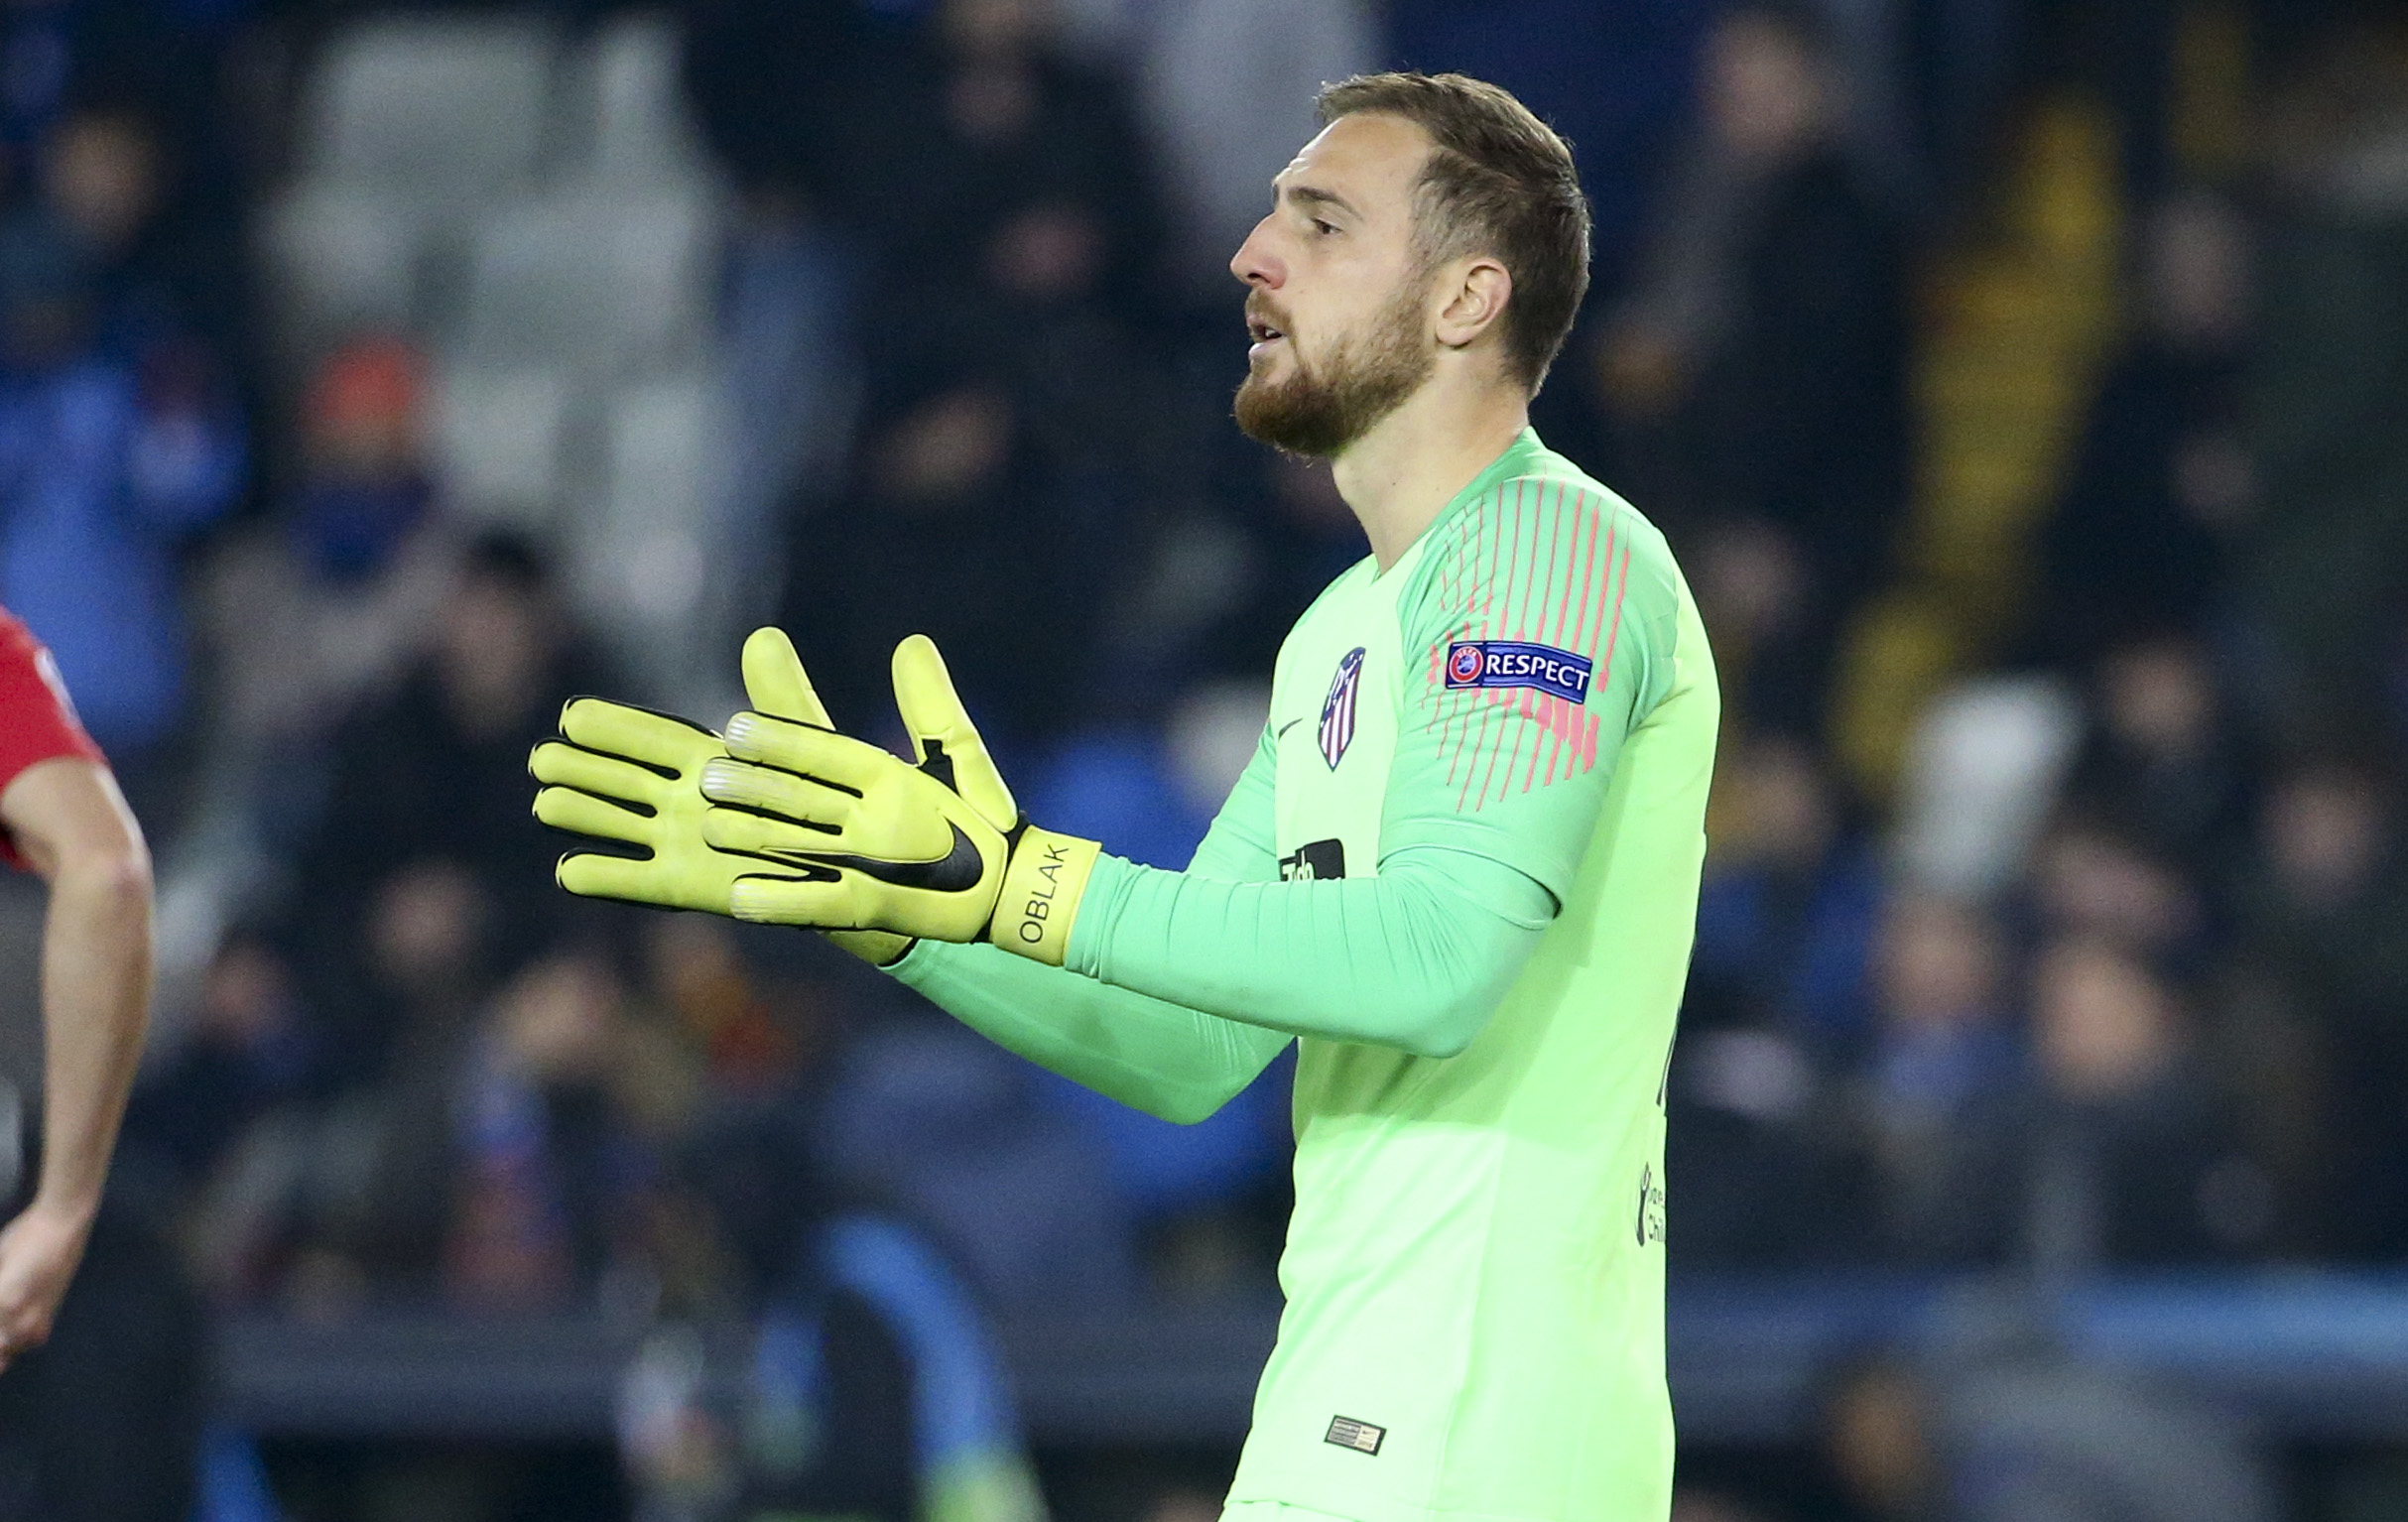 Jan Oblak in action for Atletico Madrid in the Champions League against Club Brugge in 2018.